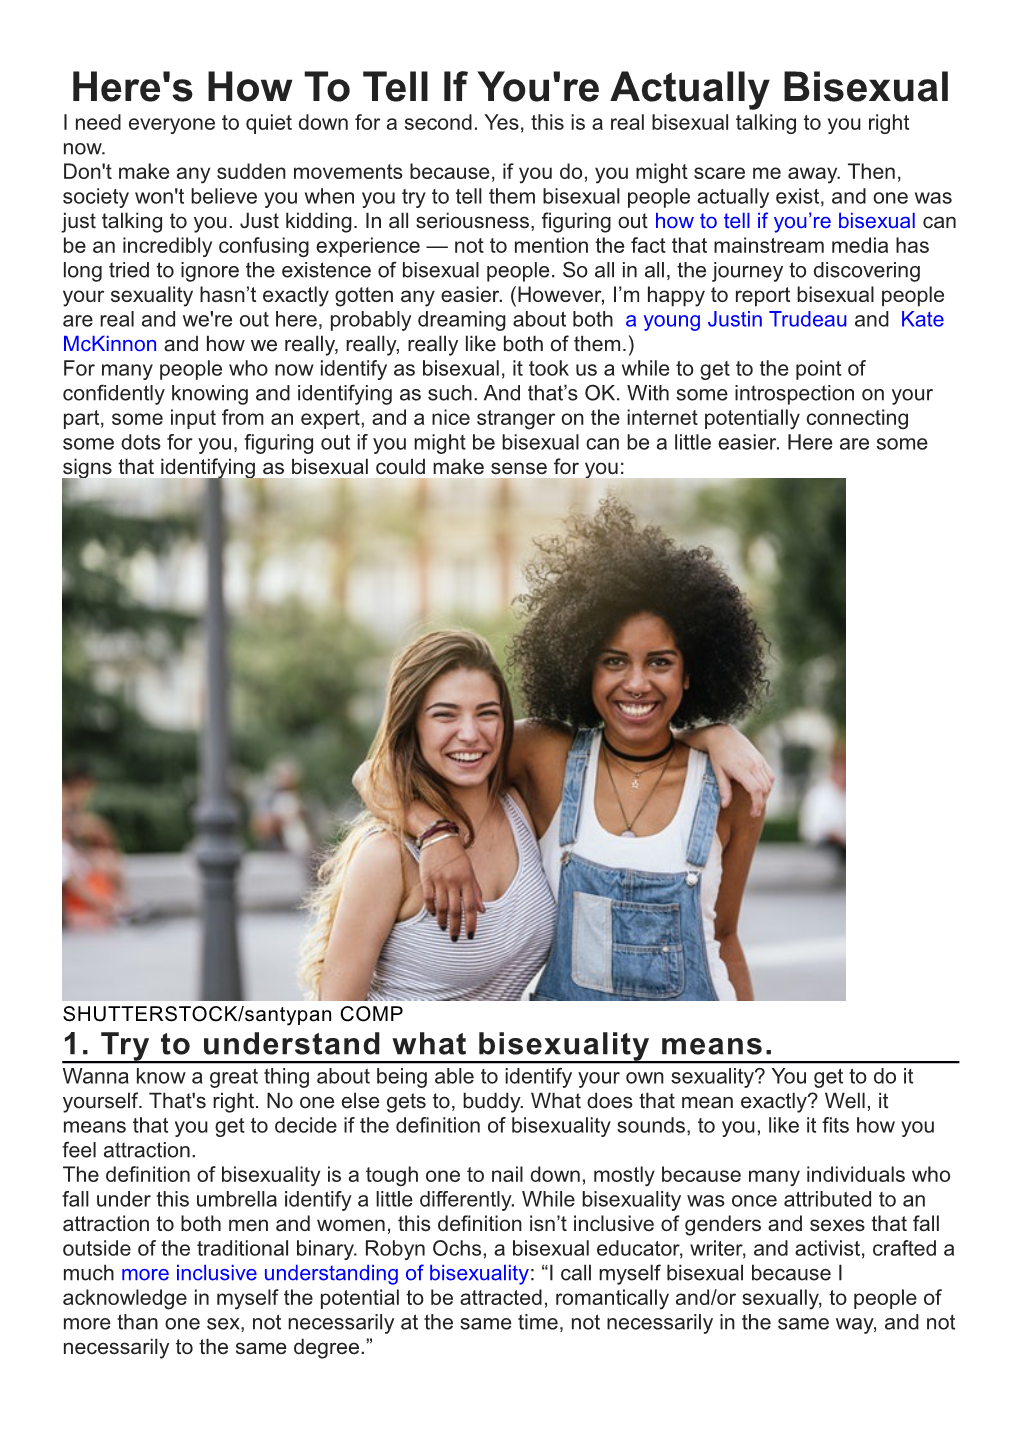 Here's How to Tell If You're Actually Bisexual